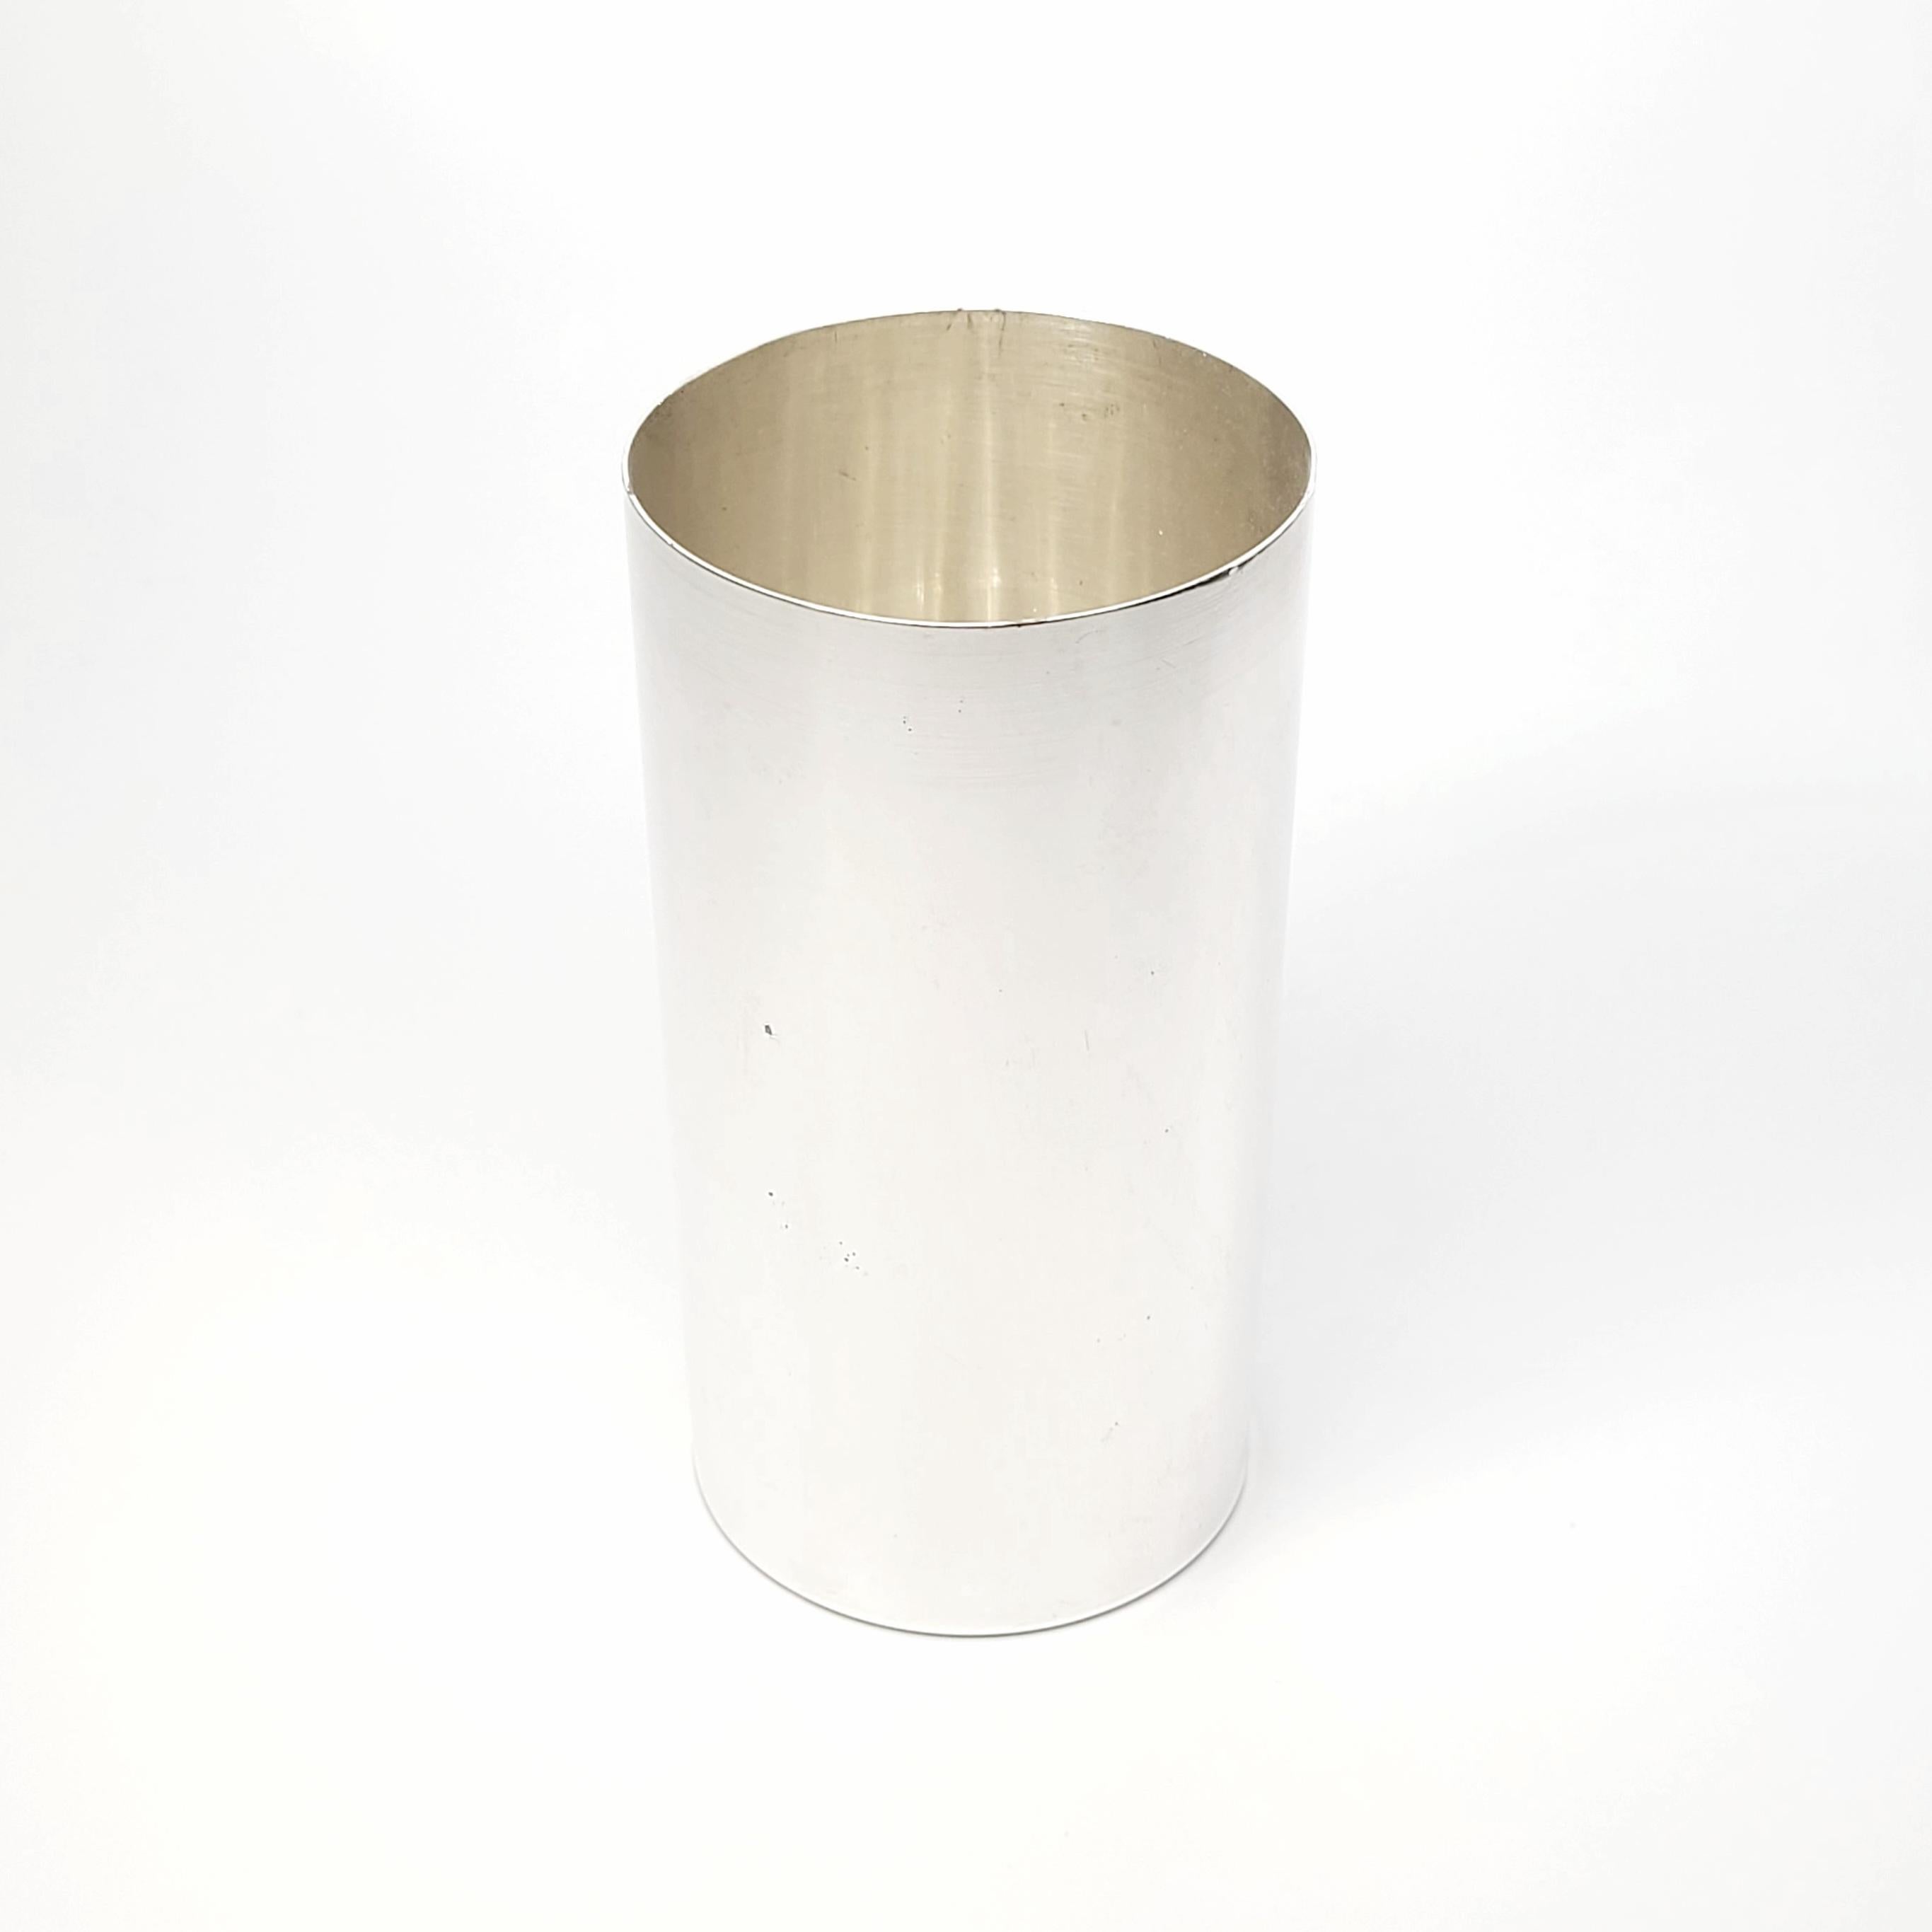 Vintage midcentury Tiffany & Co sterling silver beaker/tumbler cup.

No monogram.

This simple and elegant tumbler features a highly polished finish. Does not include Tiffany & Co box or pouch.

Measures approximate 5 5/8